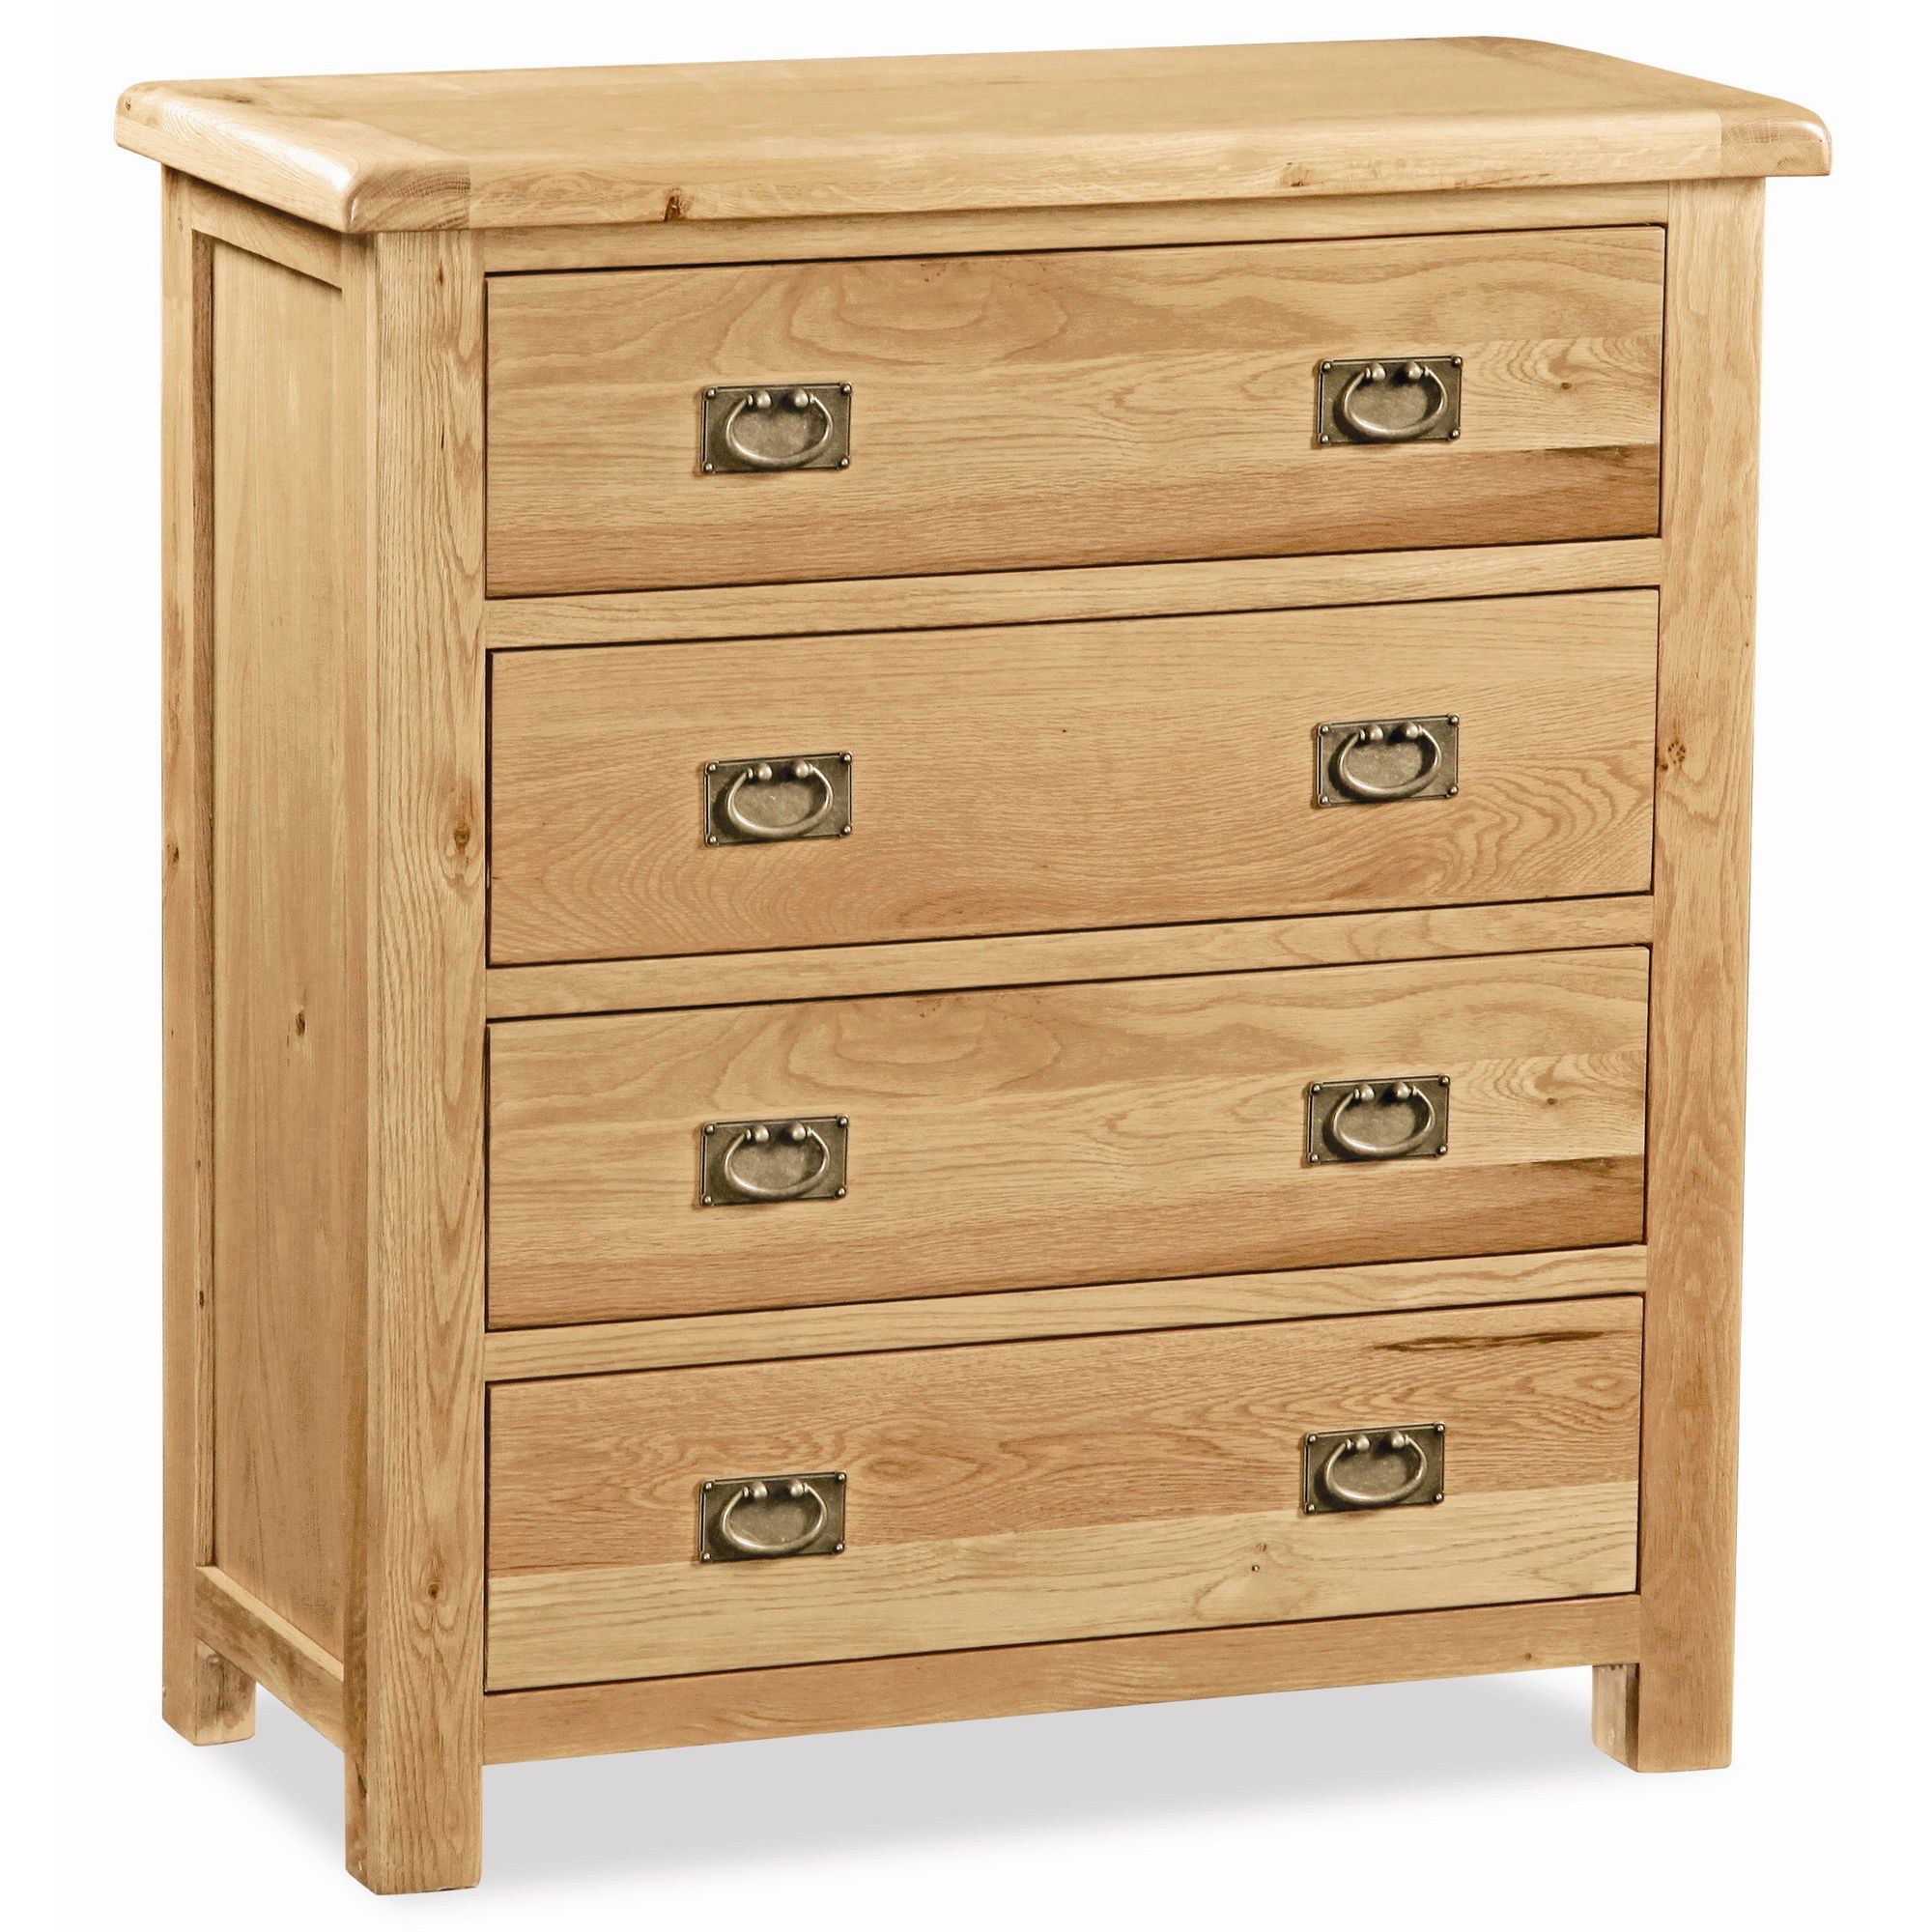 Alterton Furniture Pemberley Drawer Chest at Tesco Direct